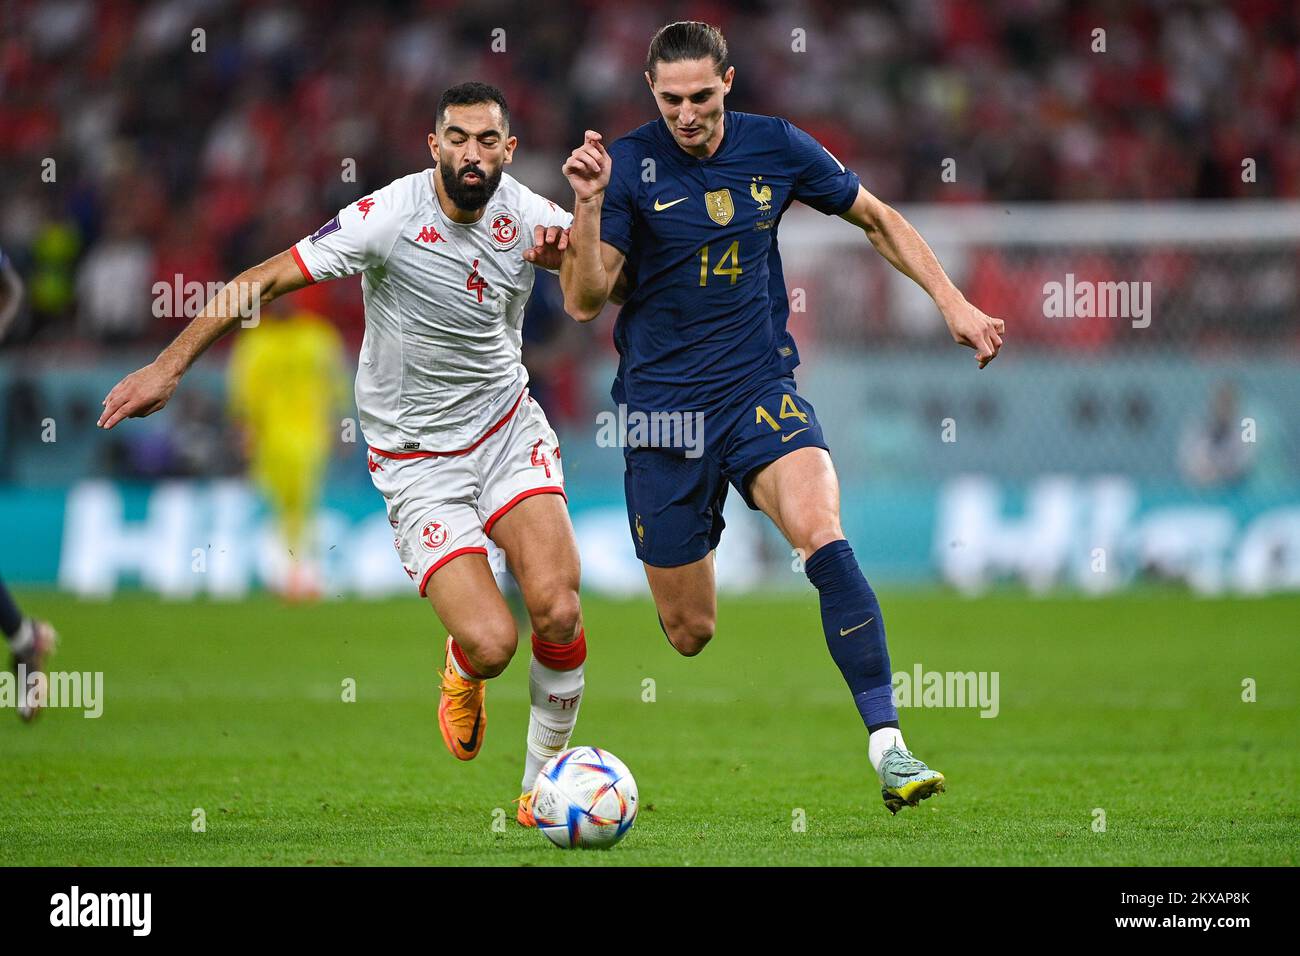 AL RAYYAN, QATAR - NOVEMBER 30: Yassine Meriah of Tunisia battles for the ball with Adrien Rabiot of France during the Group D - FIFA World Cup Qatar 2022 match between Tunisia and France at the Education City Stadium on November 30, 2022 in Al Rayyan, Qatar (Photo by Pablo Morano/BSR Agency) Credit: BSR Agency/Alamy Live News Stock Photo